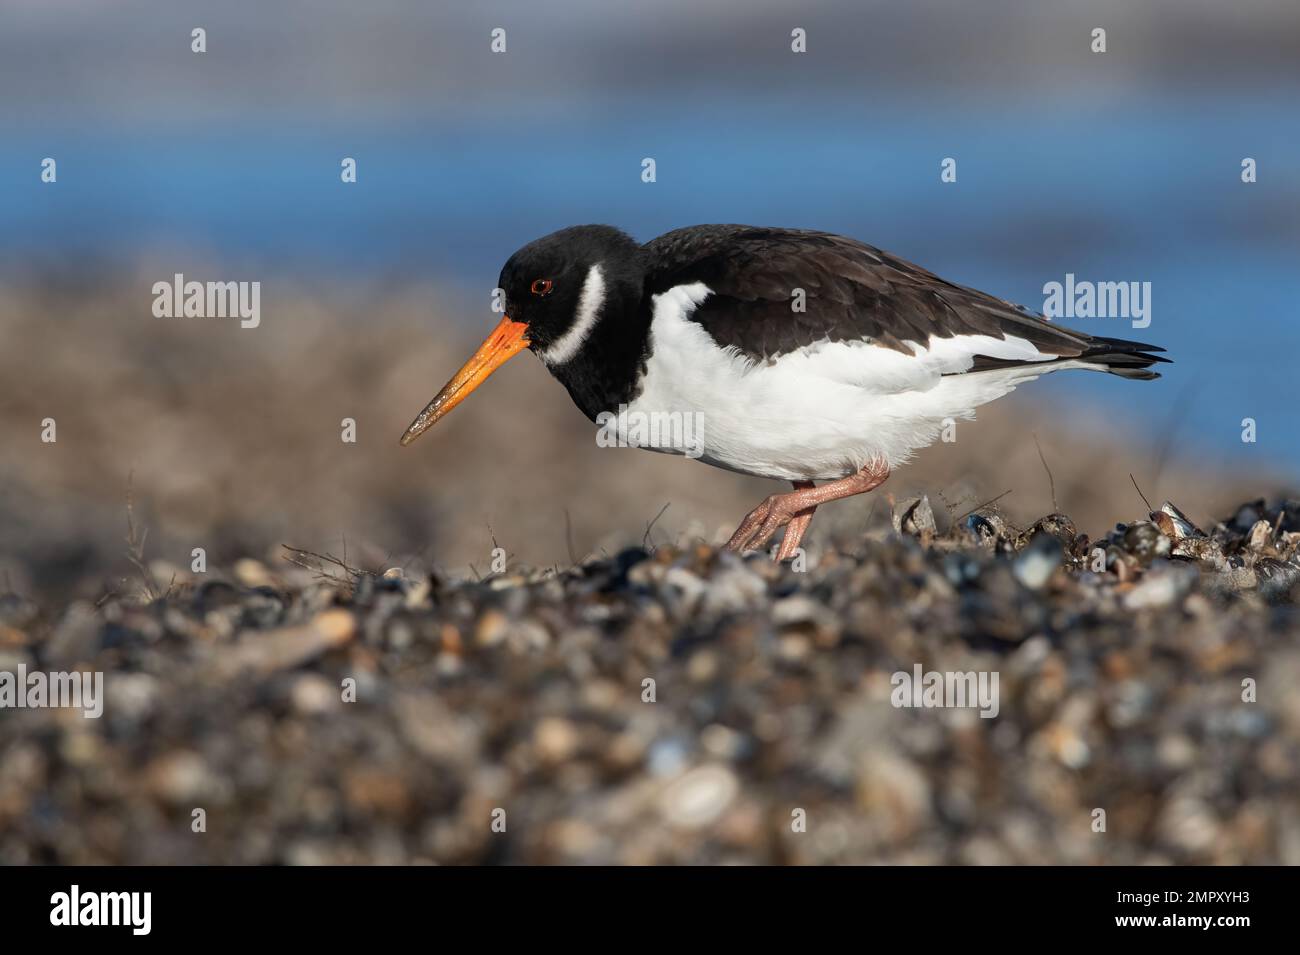 Oystercatcher (Haematopus ostralegus) searching for food in mussel beds Stock Photo